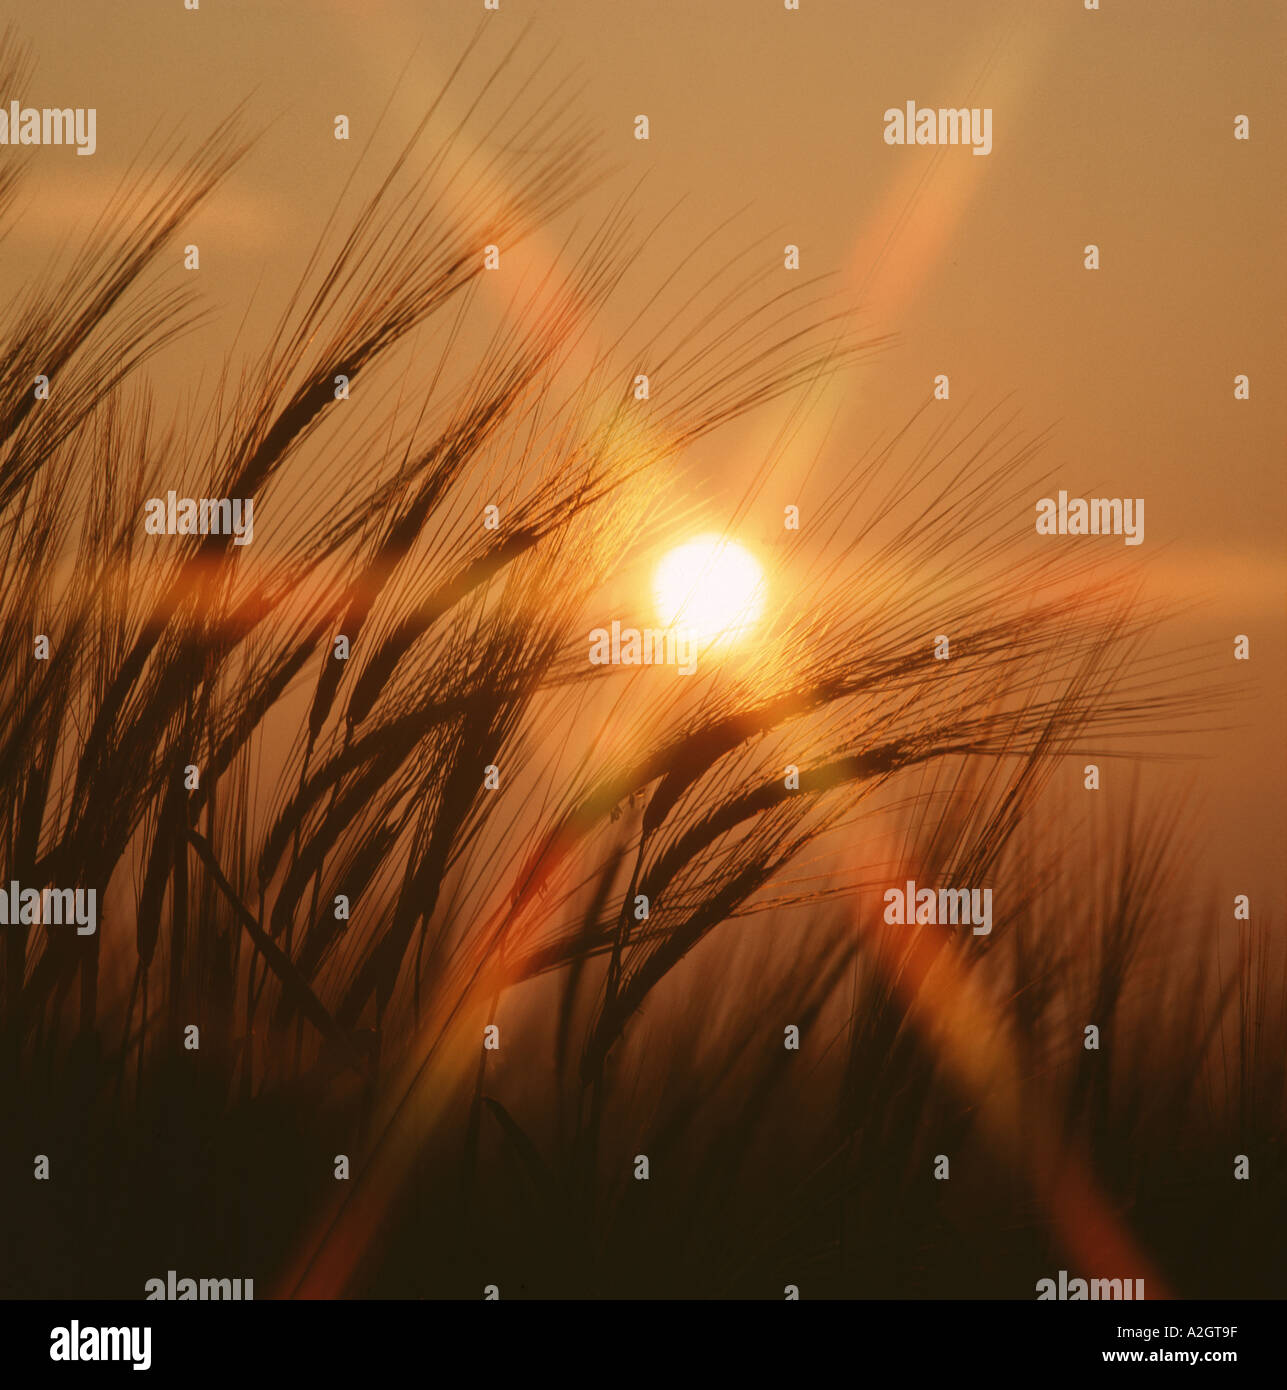 Barley ears and awns silouetted against the red setting sun in early summer Stock Photo